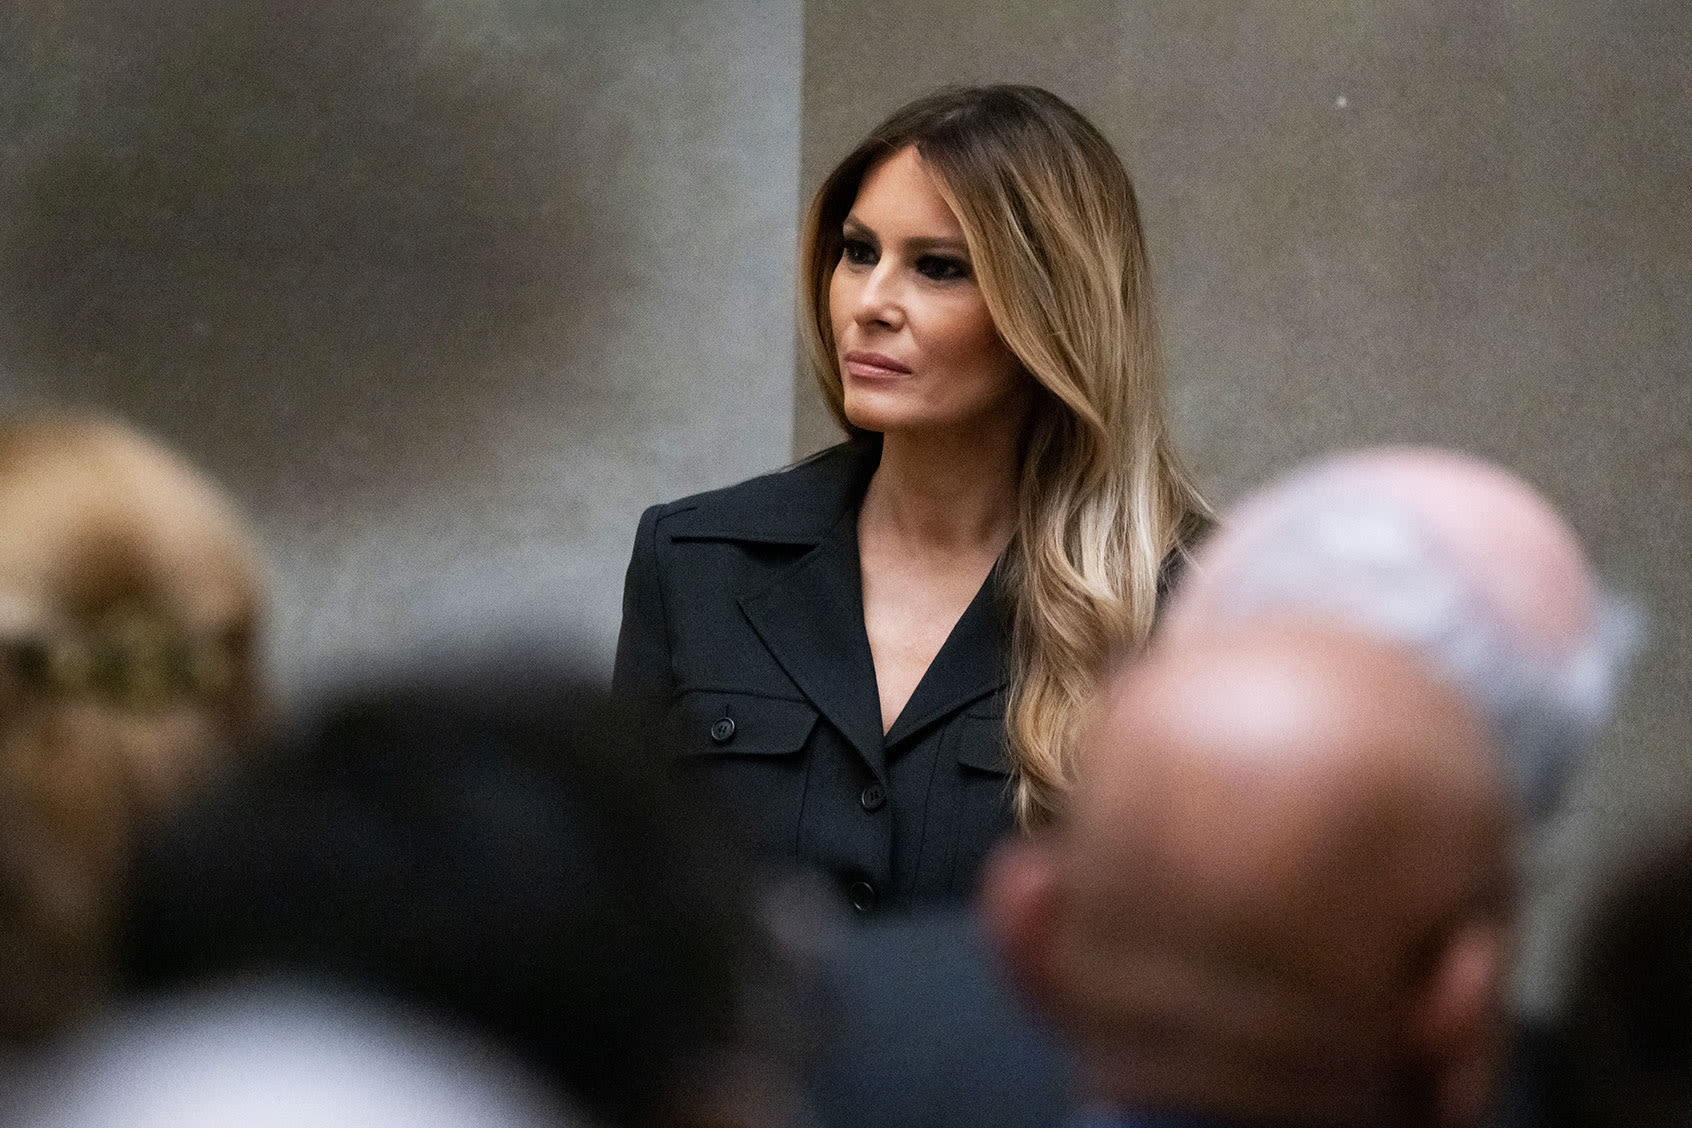 "The jury is going to take notice": Melania Trump missing in the courtroom and on the campaign trail